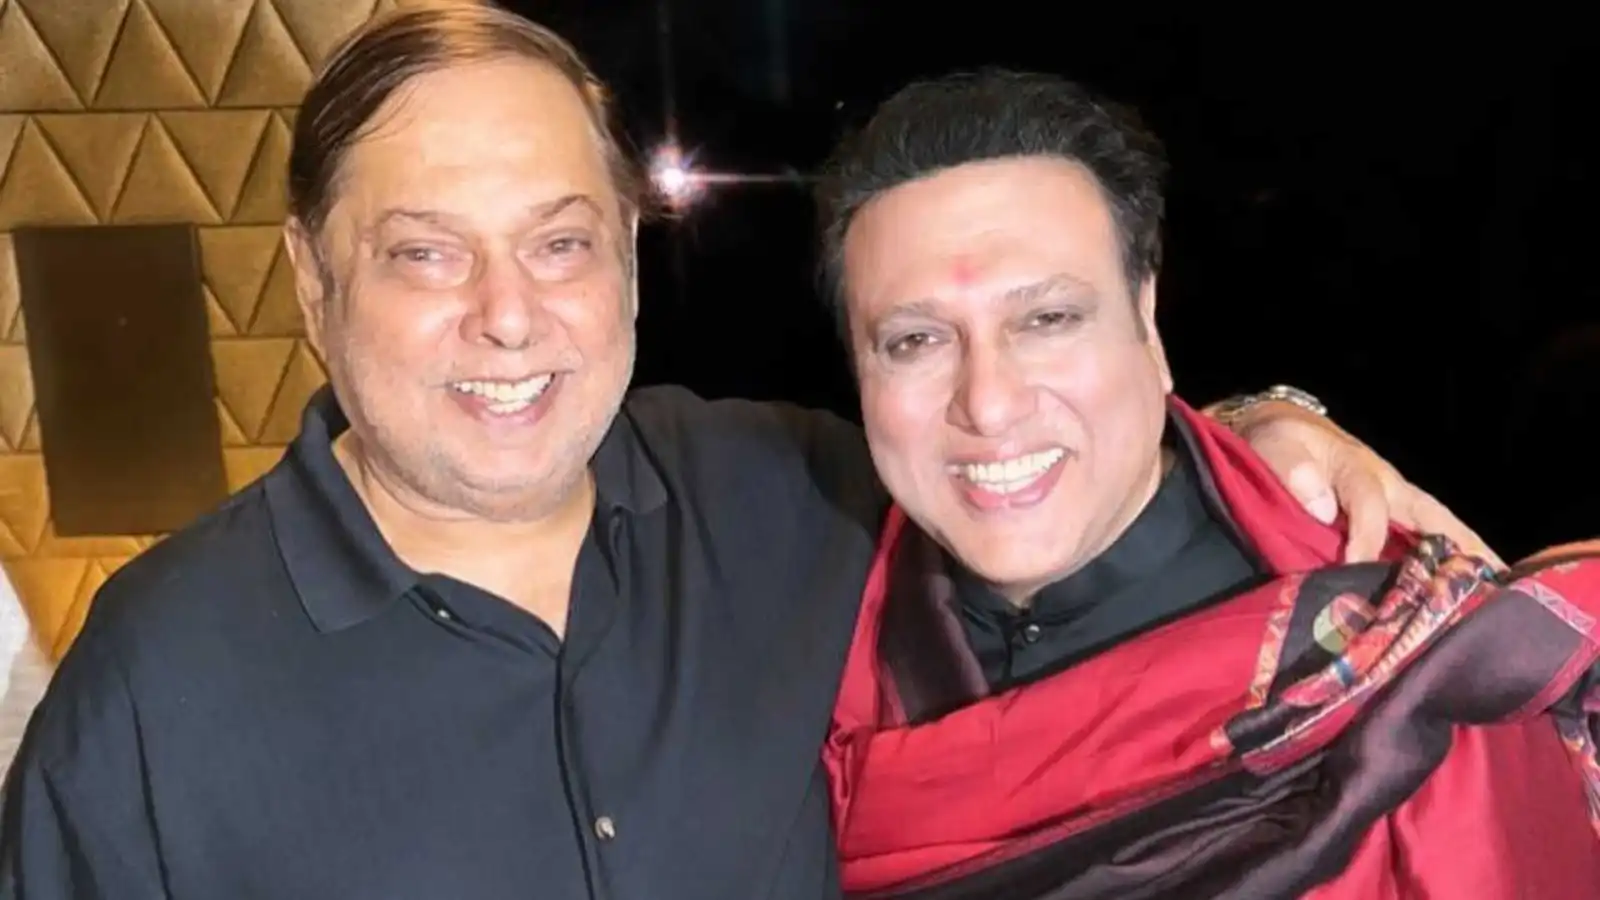 Govinda confirms reuniting with David Dhawan after years of fallout, here’s what he said